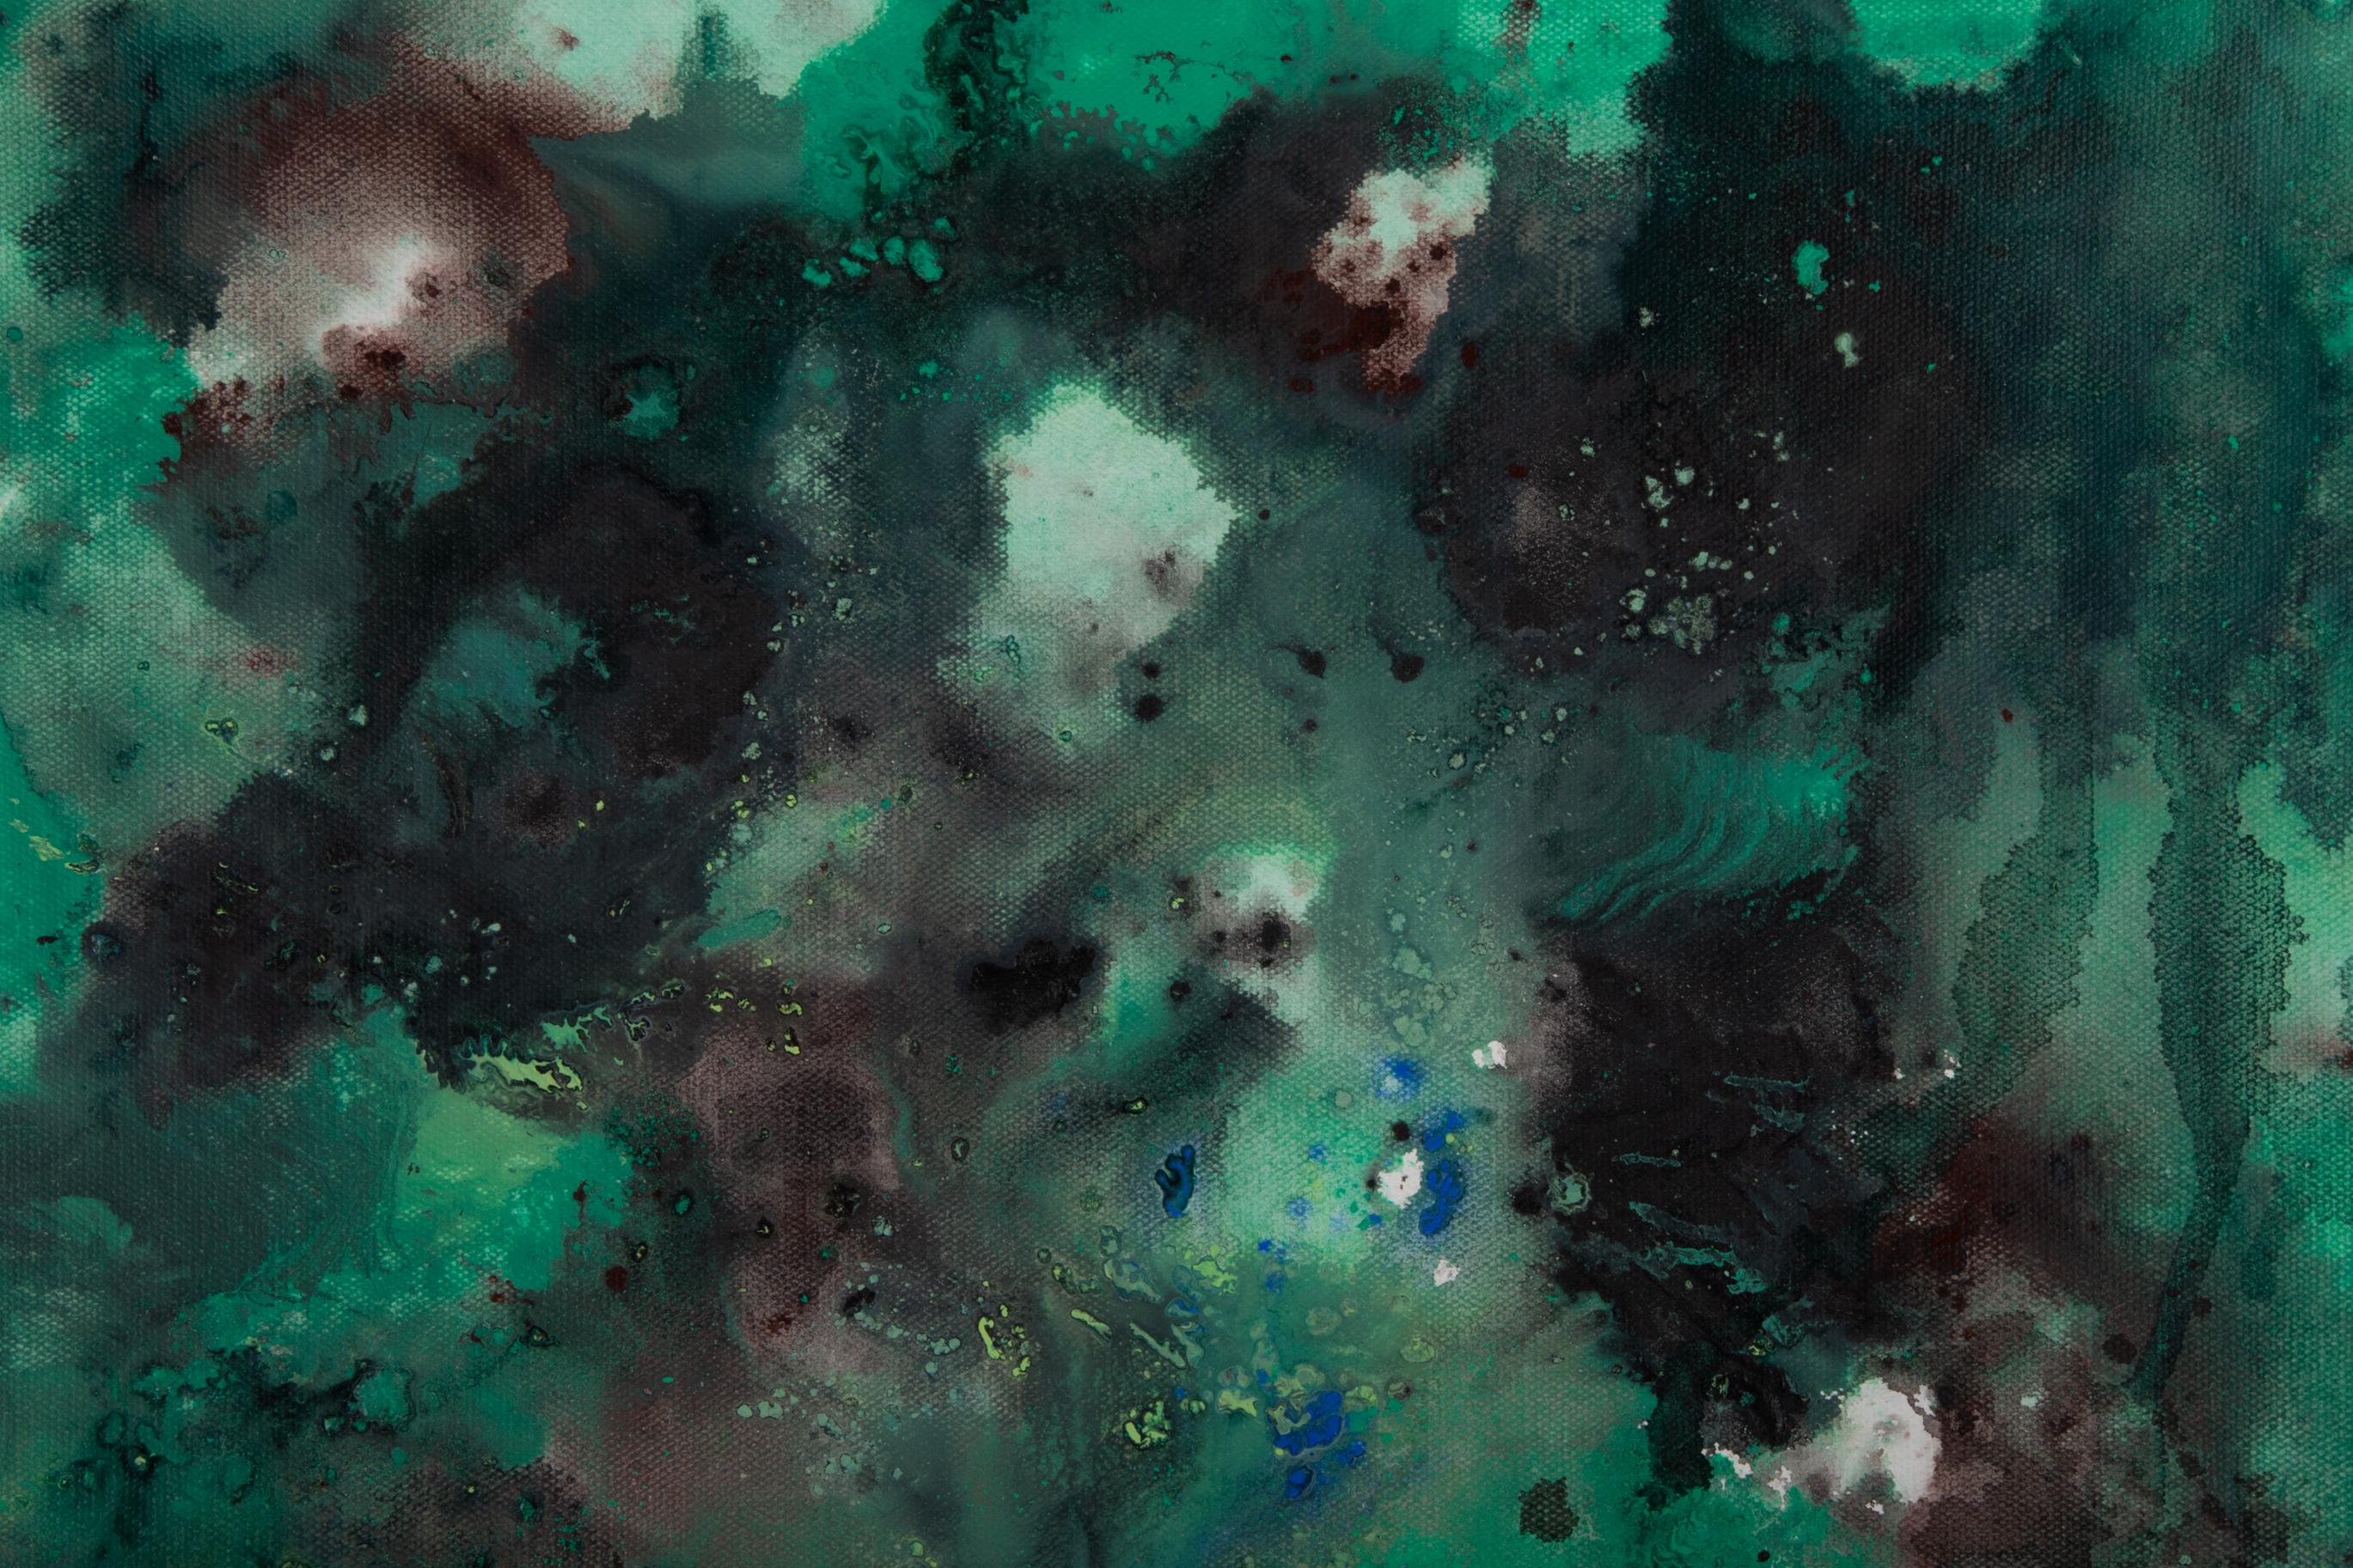 Chong Liu Abstract Original Oil On Canvas The Beginning Of Nature-Green In Black For Sale 1